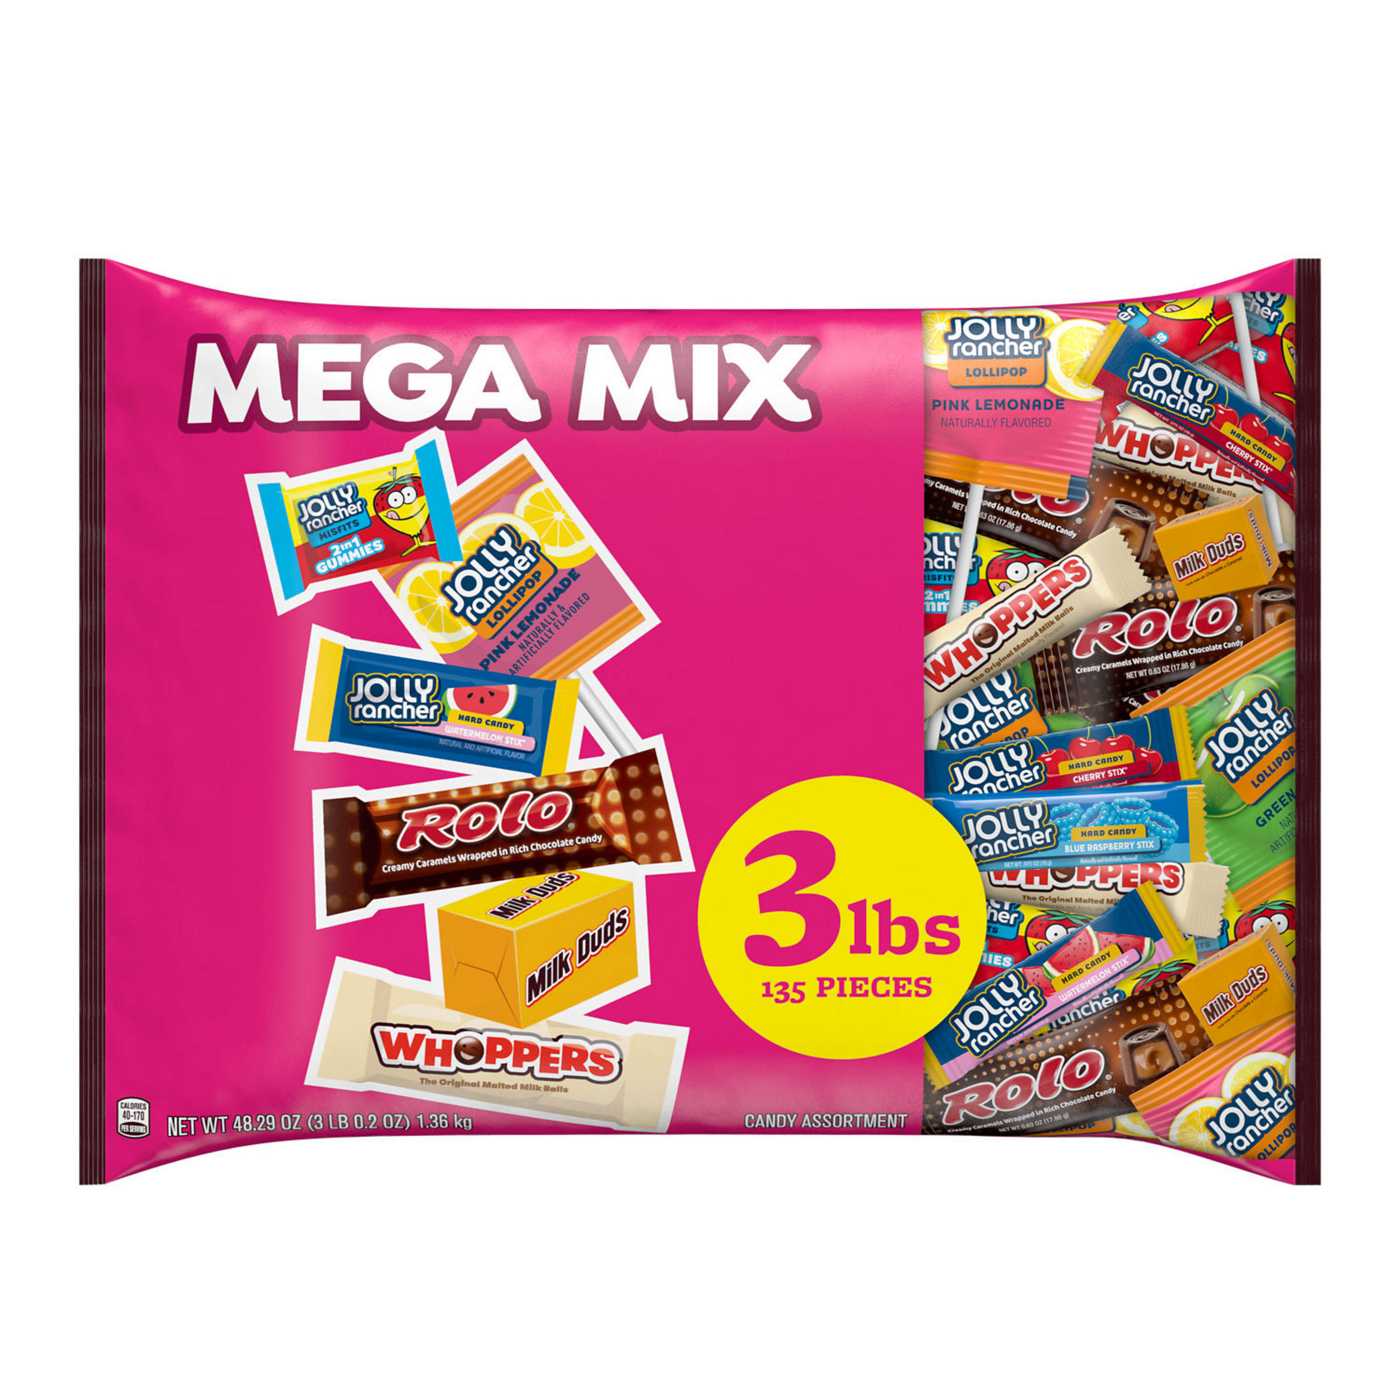 Rolo, Milk Duds, Jolly Rancher, & Whoppers Mega Mix Snack Size Candy; image 1 of 4